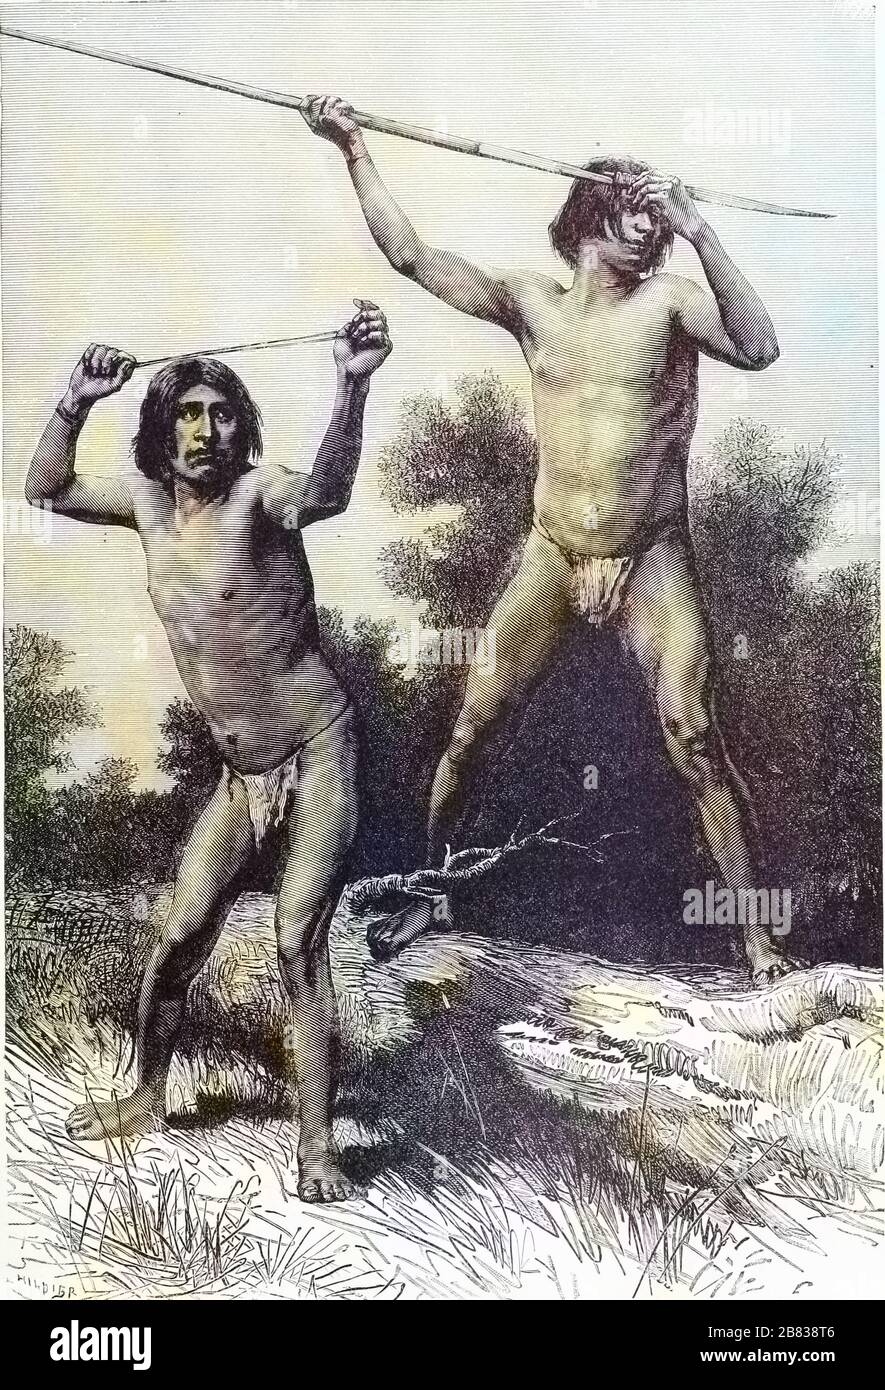 Engraved drawing of the native hunters of Tierra Del Fuego with spear and sling, from the book 'Ridpath's Universal history' by John Clark Ridpath, 1897. Courtesy Internet Archive. Note: Image has been digitally colorized using a modern process. Colors may not be period-accurate. () Stock Photo